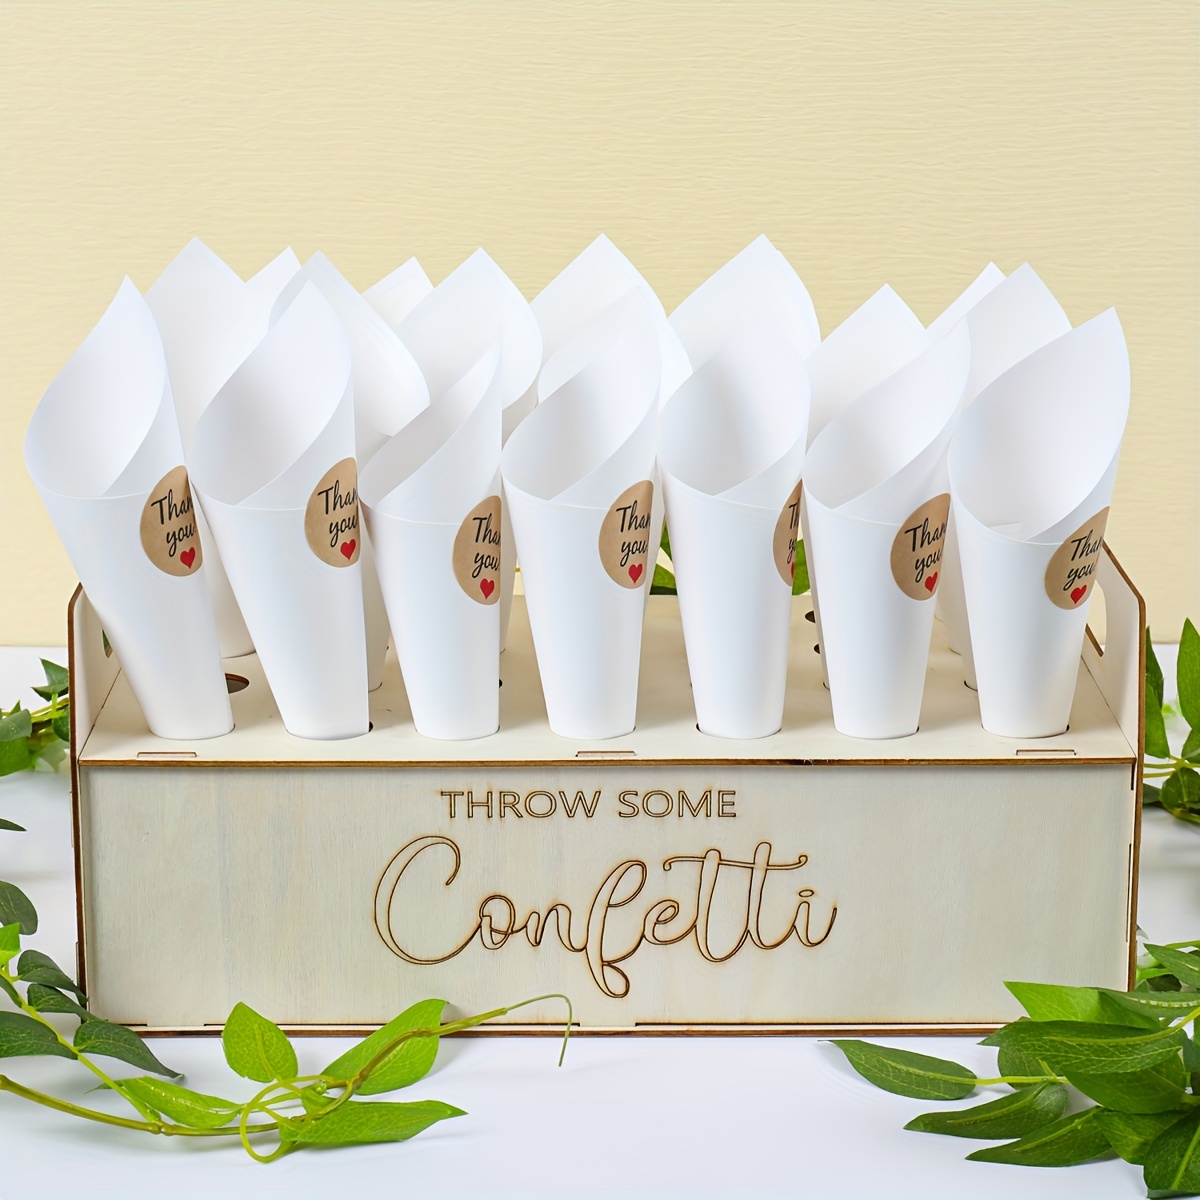 

Elegant Wooden Confetti Box Set - Perfect For Weddings, Parties & Holiday Table Decorations